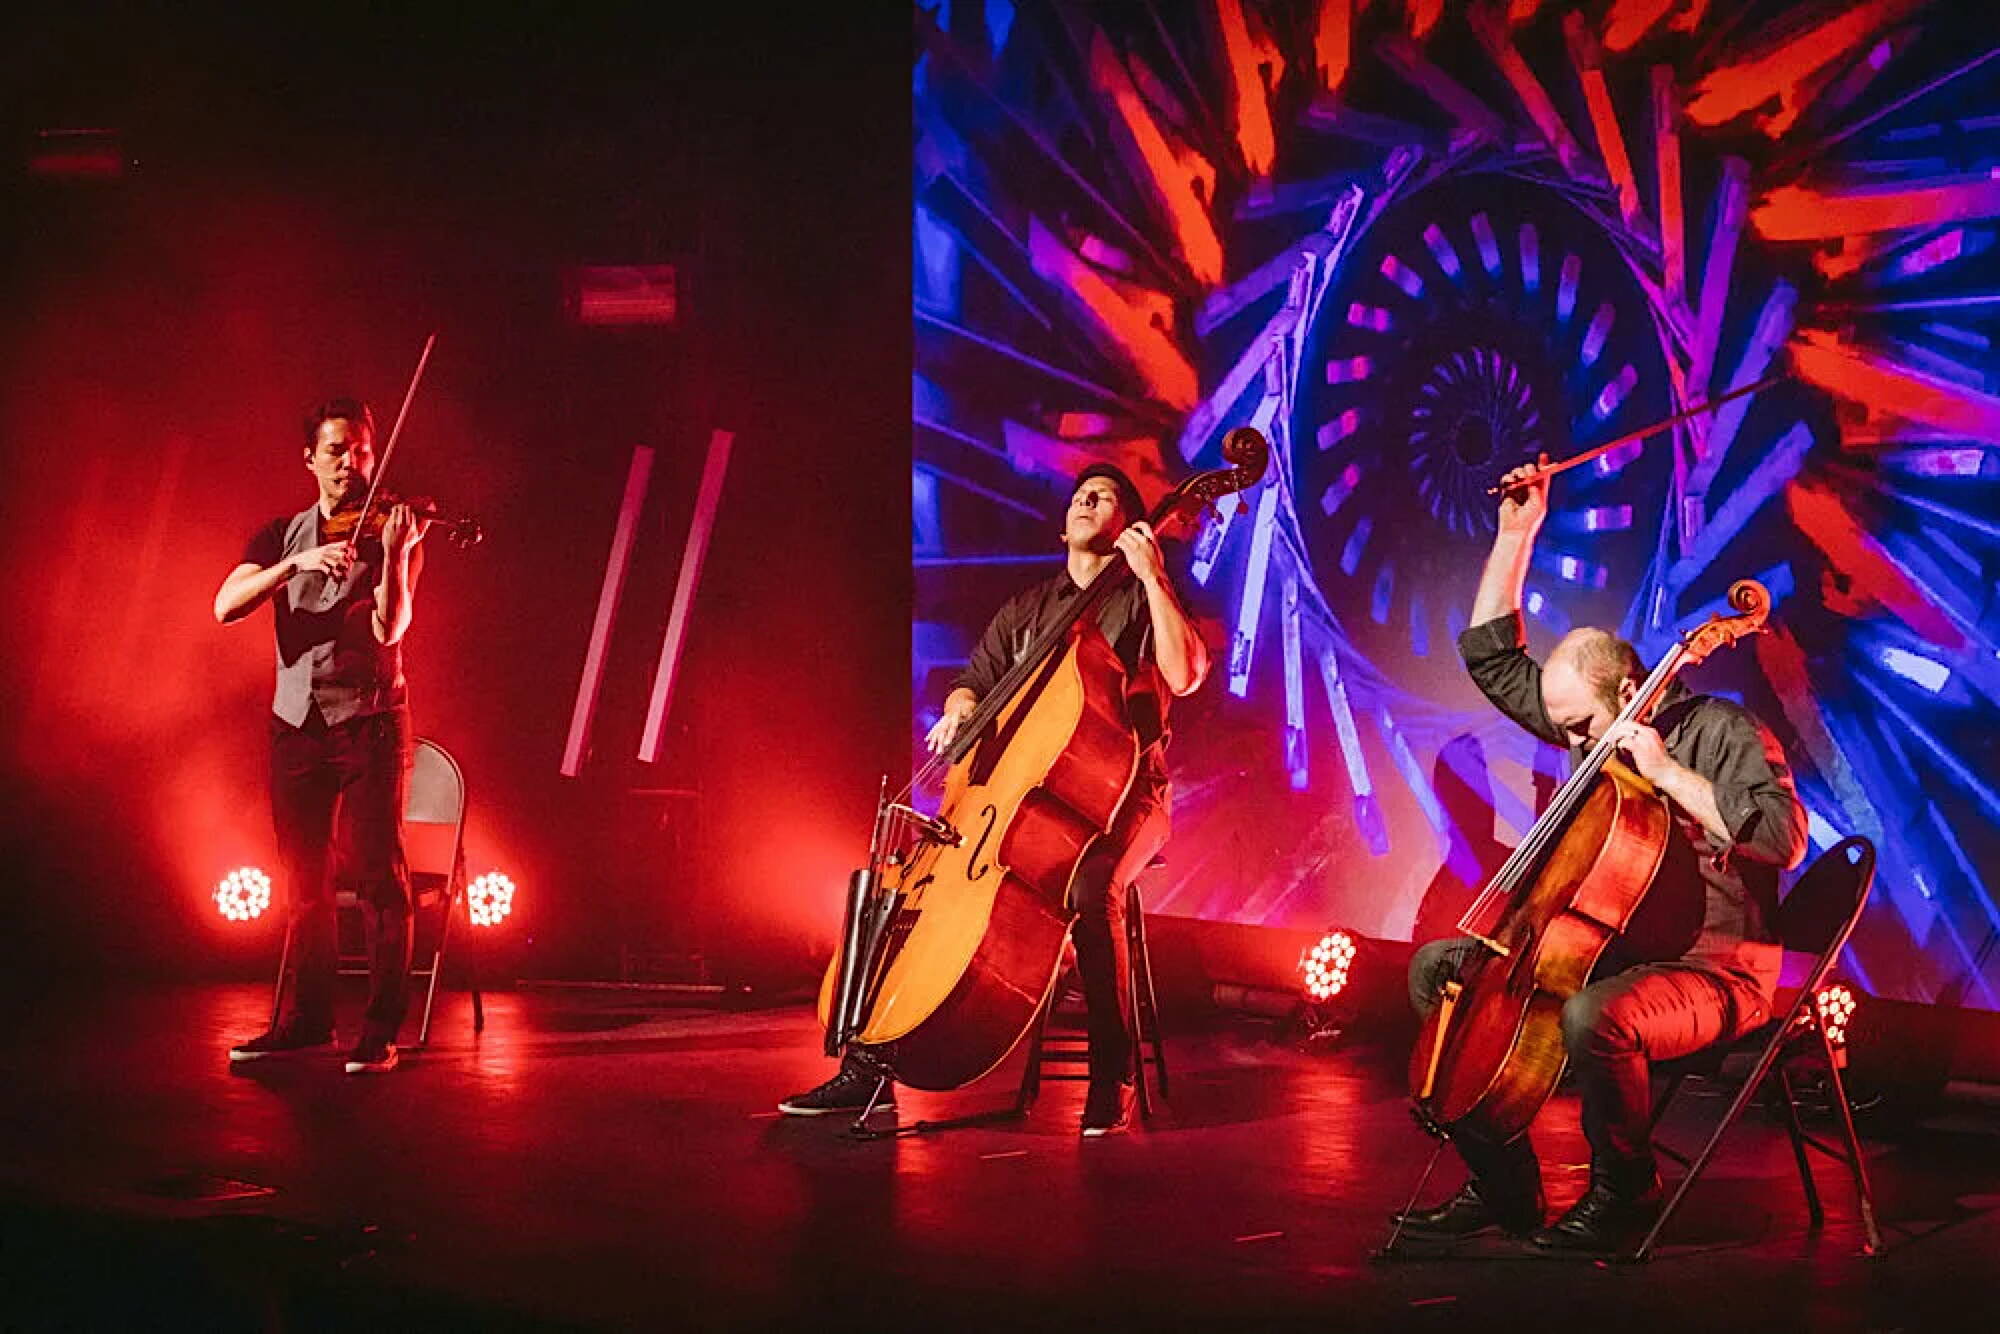 The string trio Simply Three is scheduled to perform rock works ranging from Coldplay to Michael Jackson during this fall’s Juneau Jazz & Classics festival. (Courtesy photo)